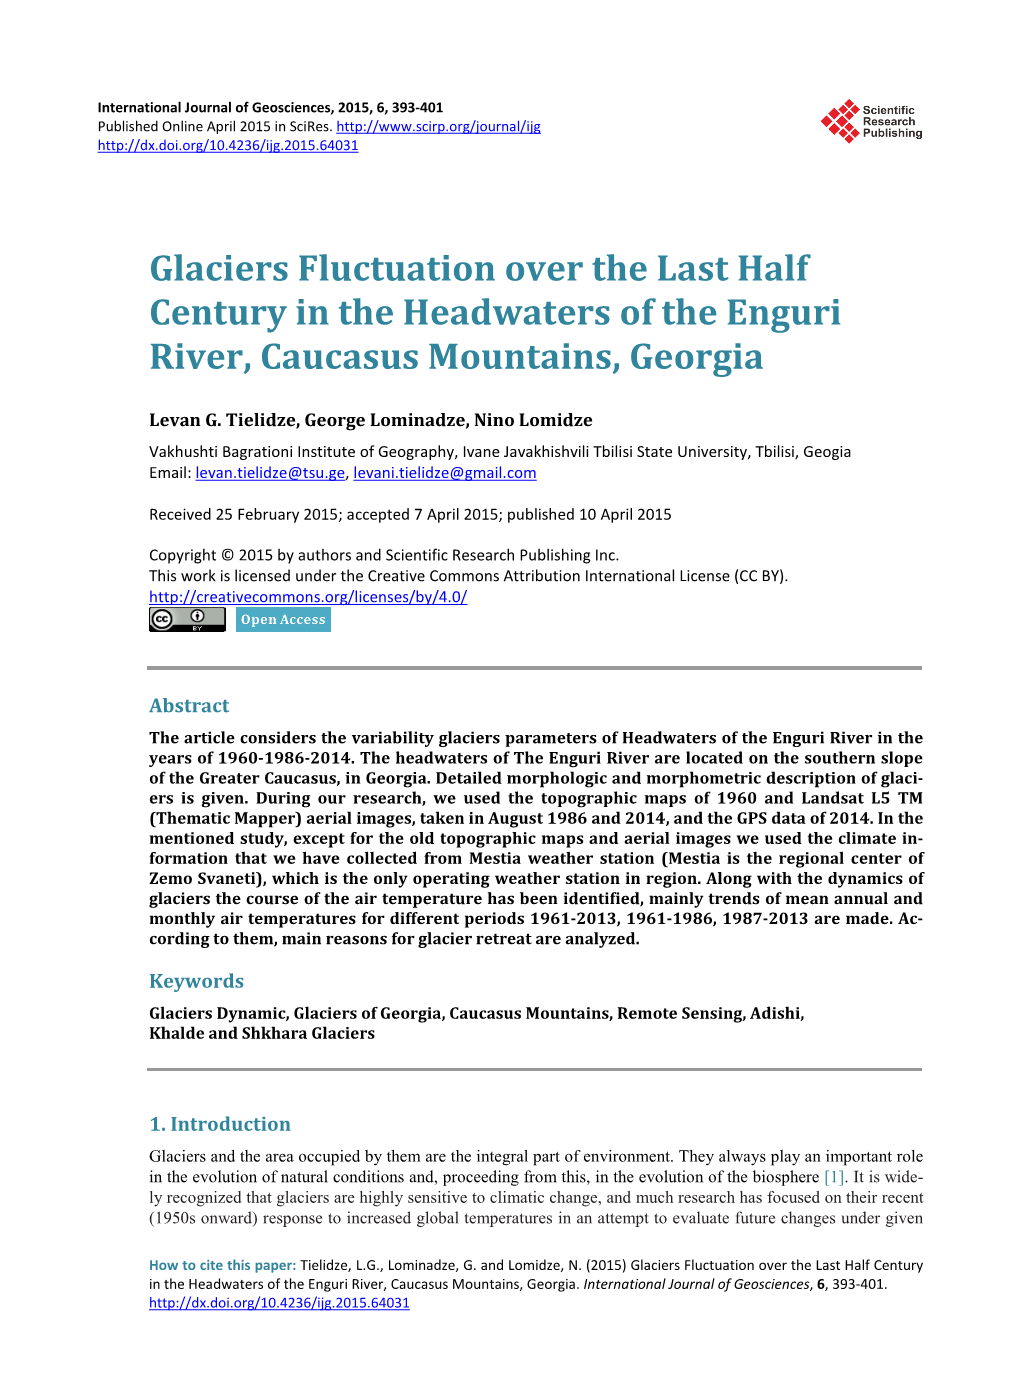 Glaciers Fluctuation Over the Last Half Century in the Headwaters of the Enguri River, Caucasus Mountains, Georgia